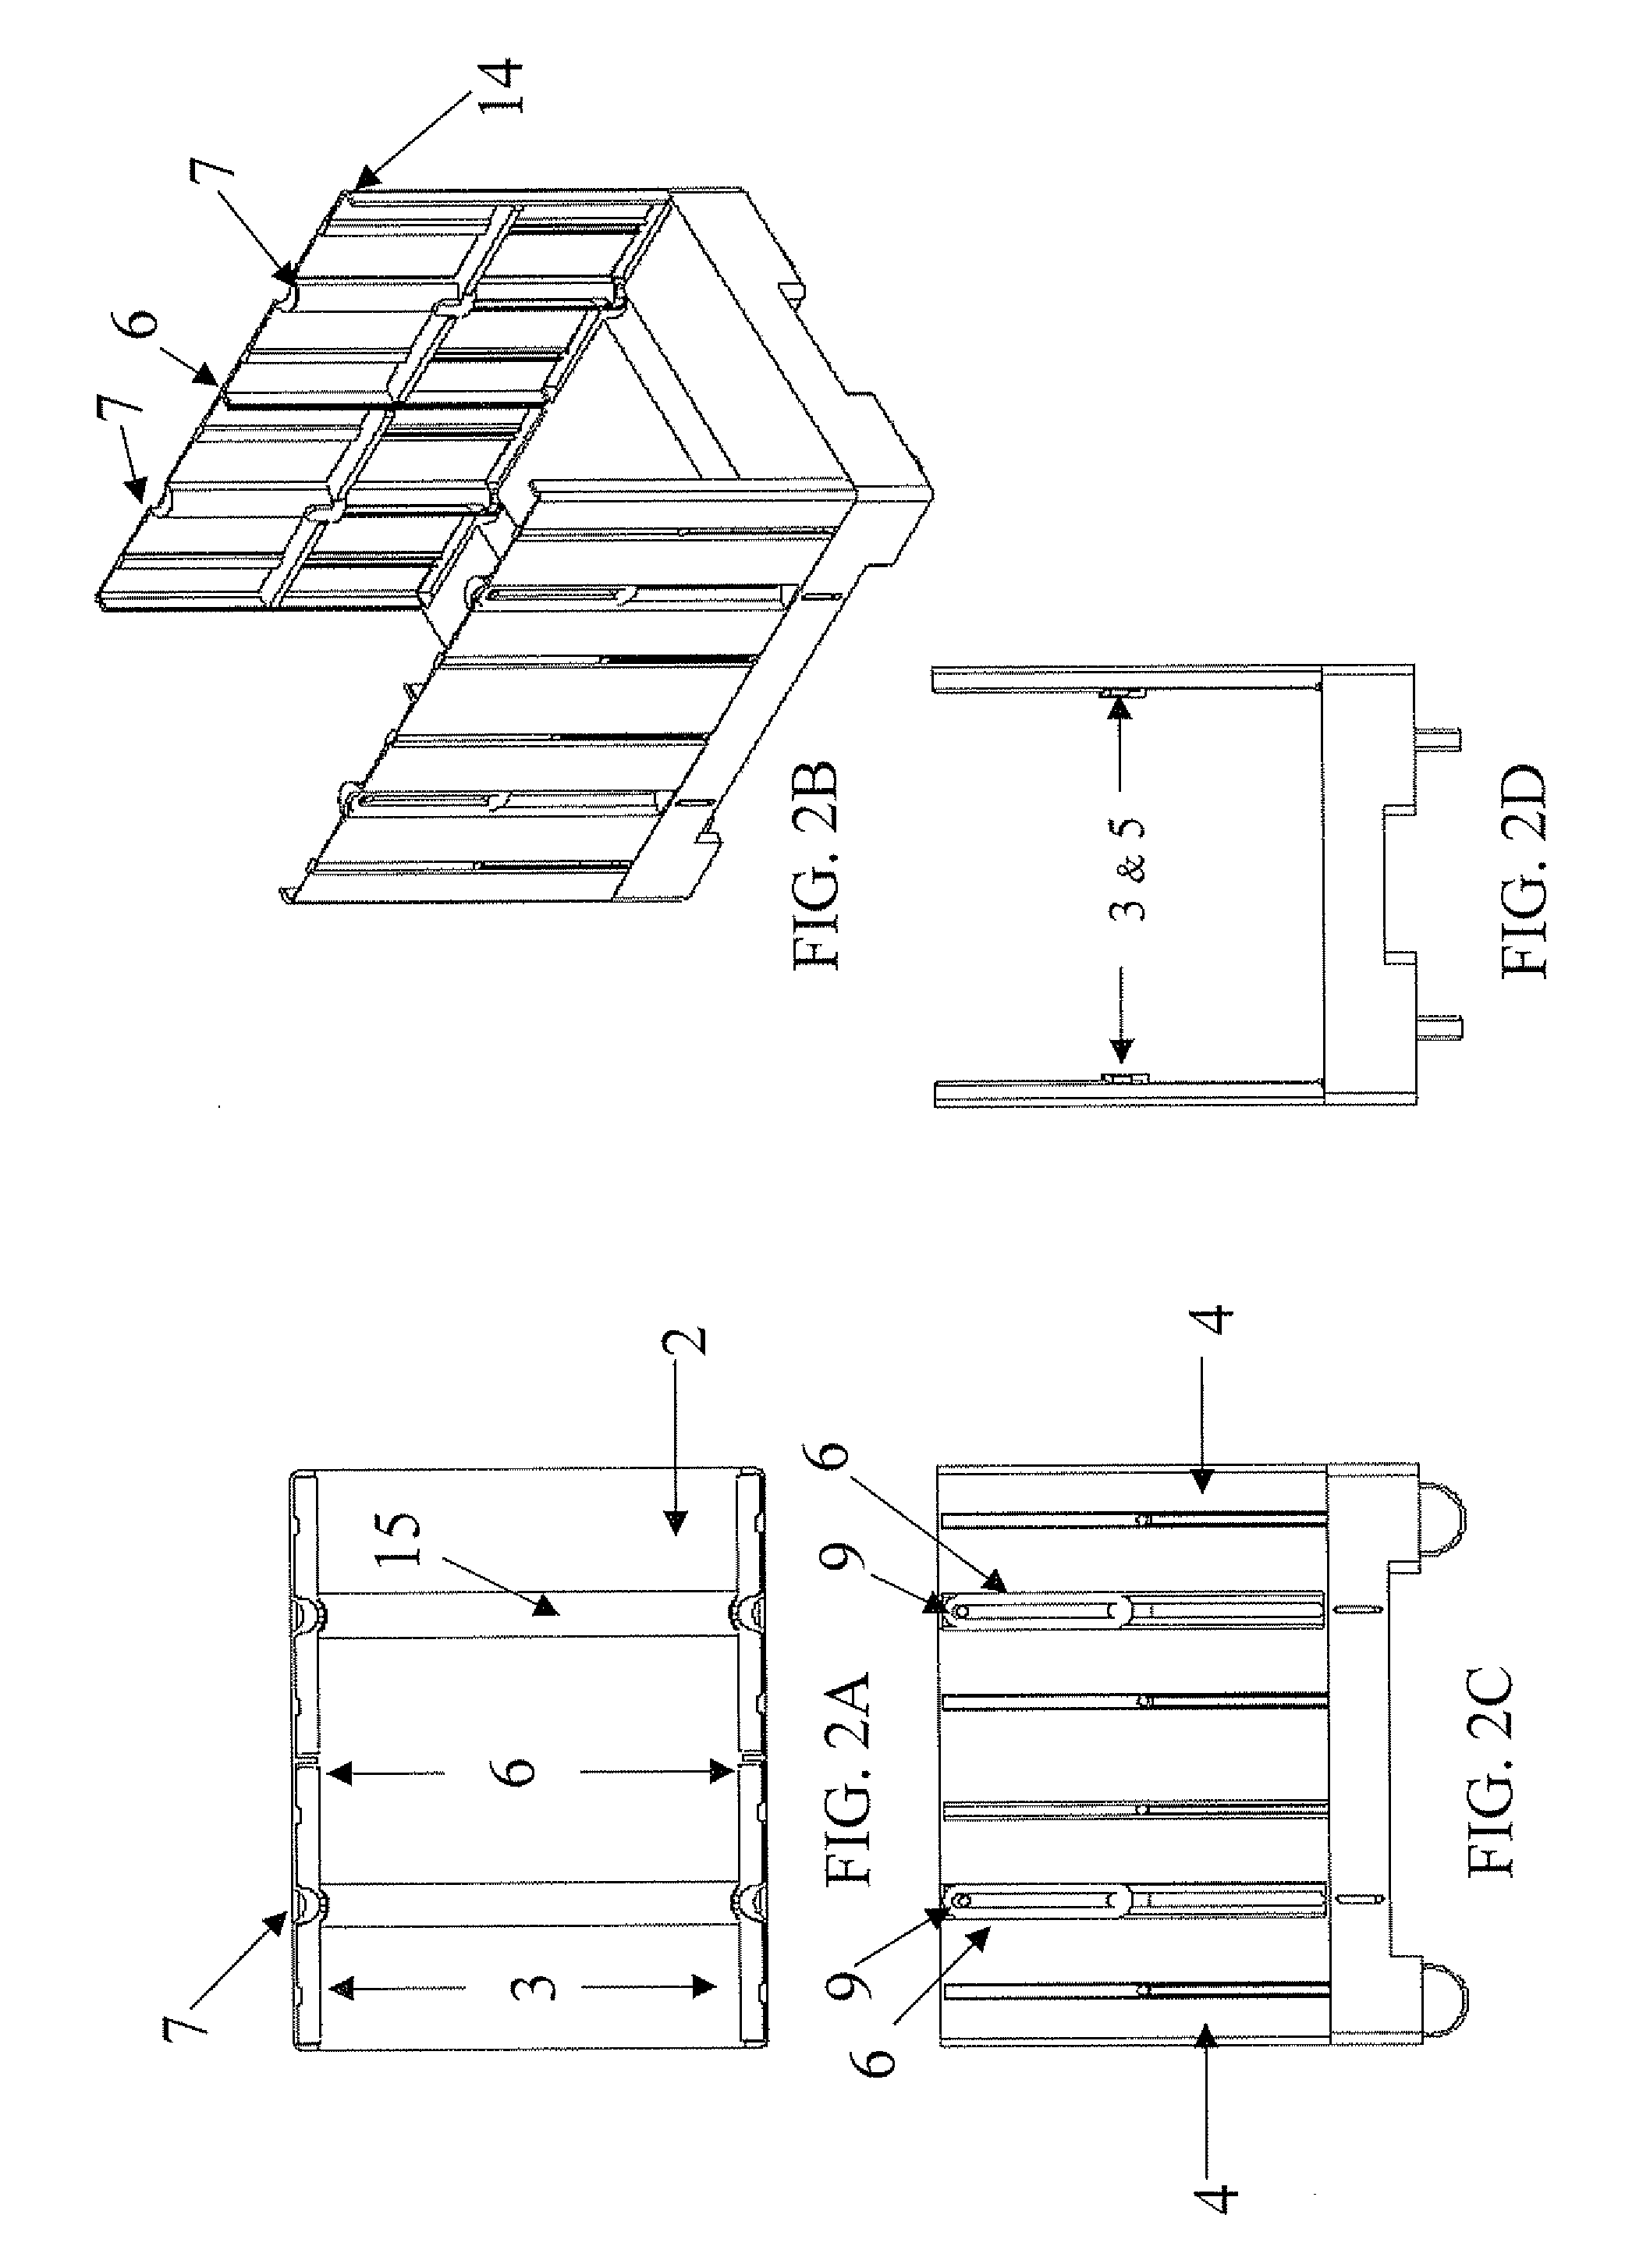 Dolly with elastically suspended load-bearing surface